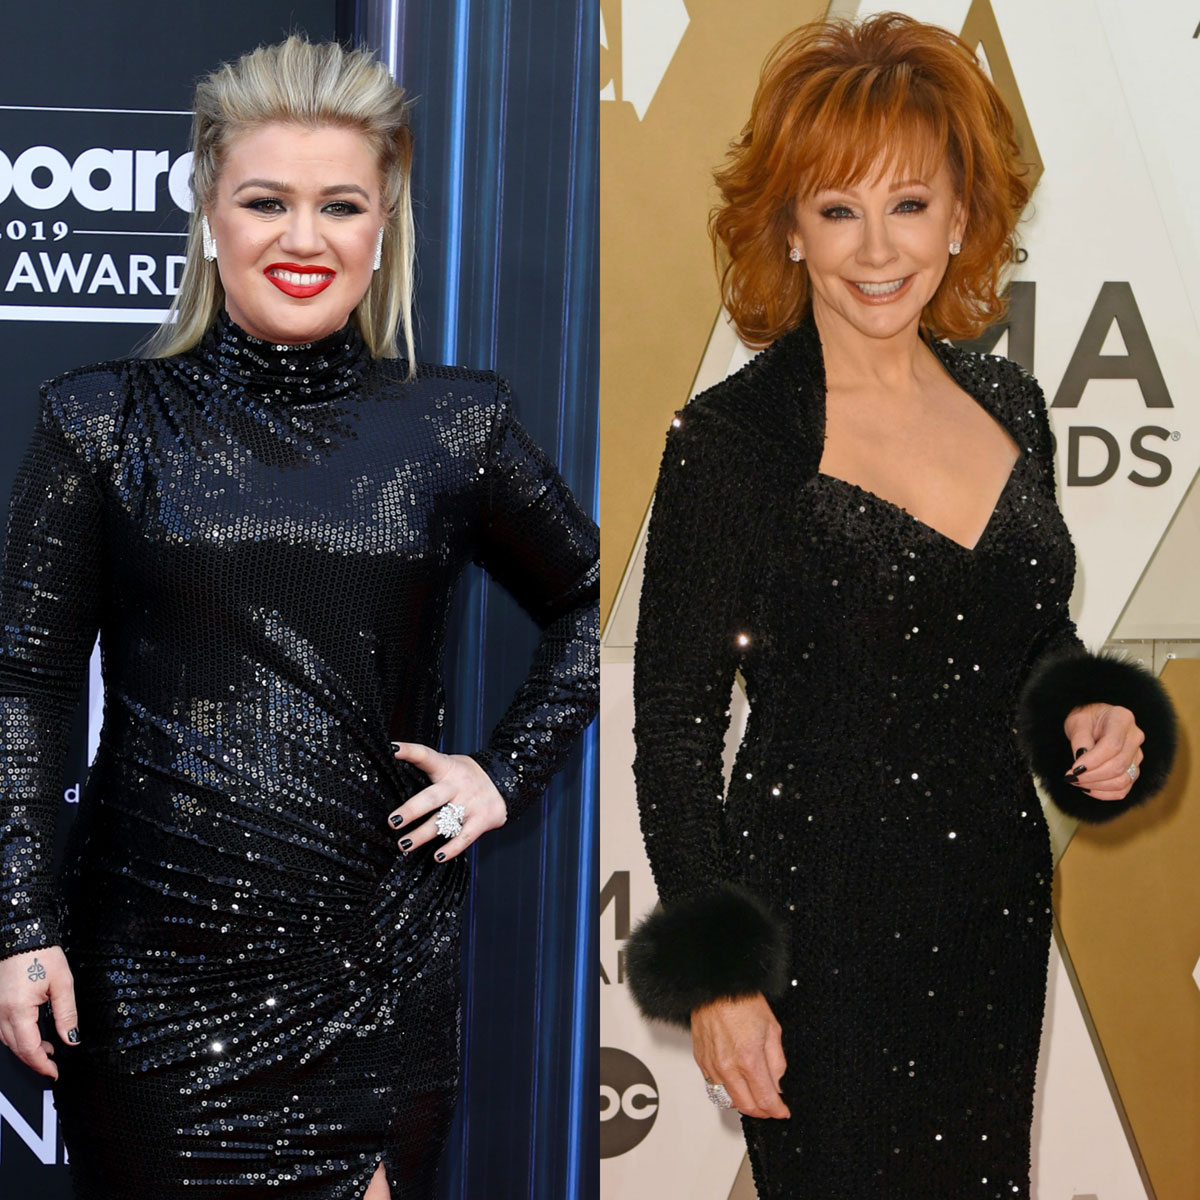 Kelly Clarkson and Reba McEntire are related